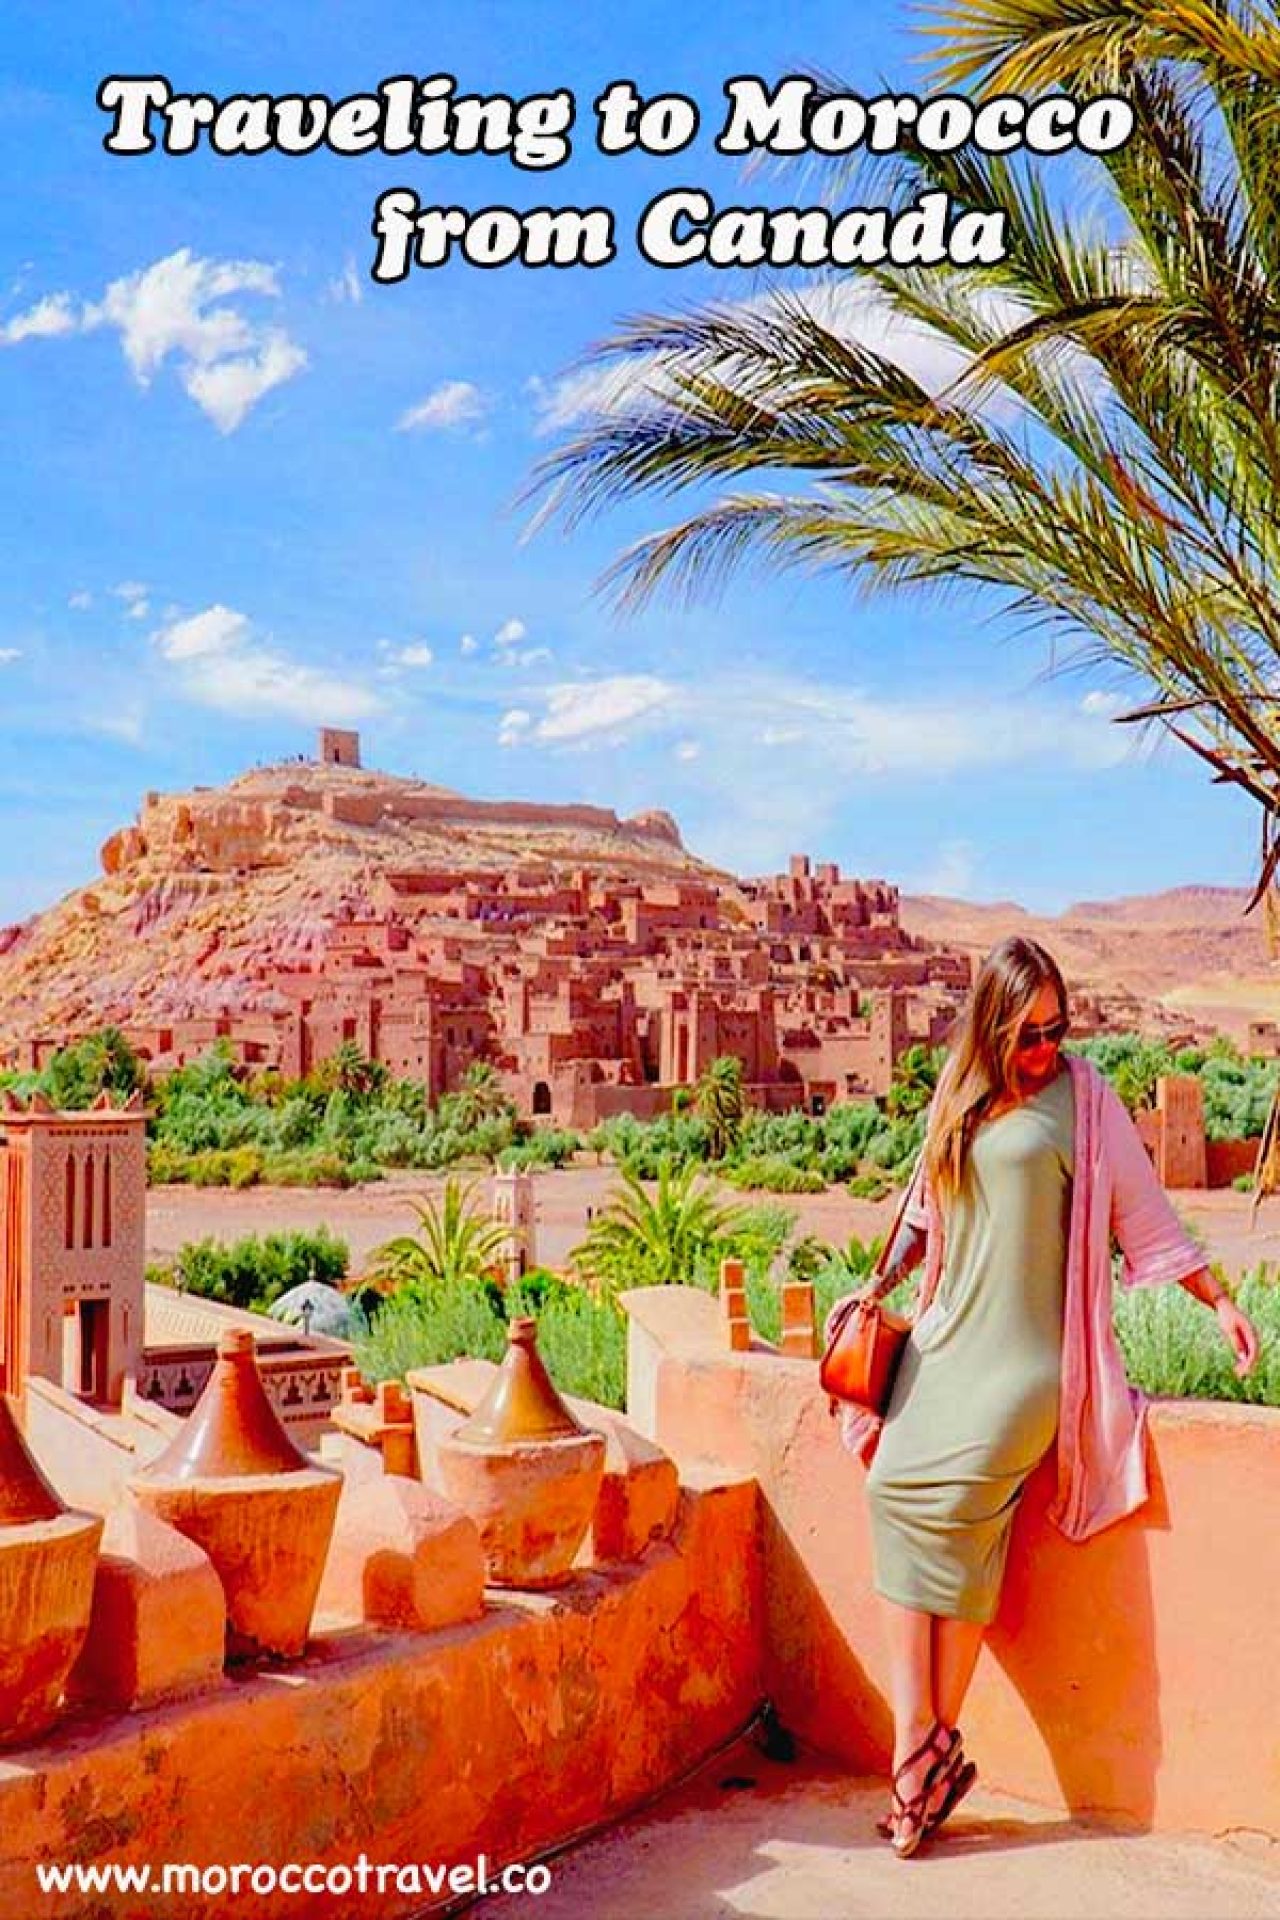 tours to morocco from canada